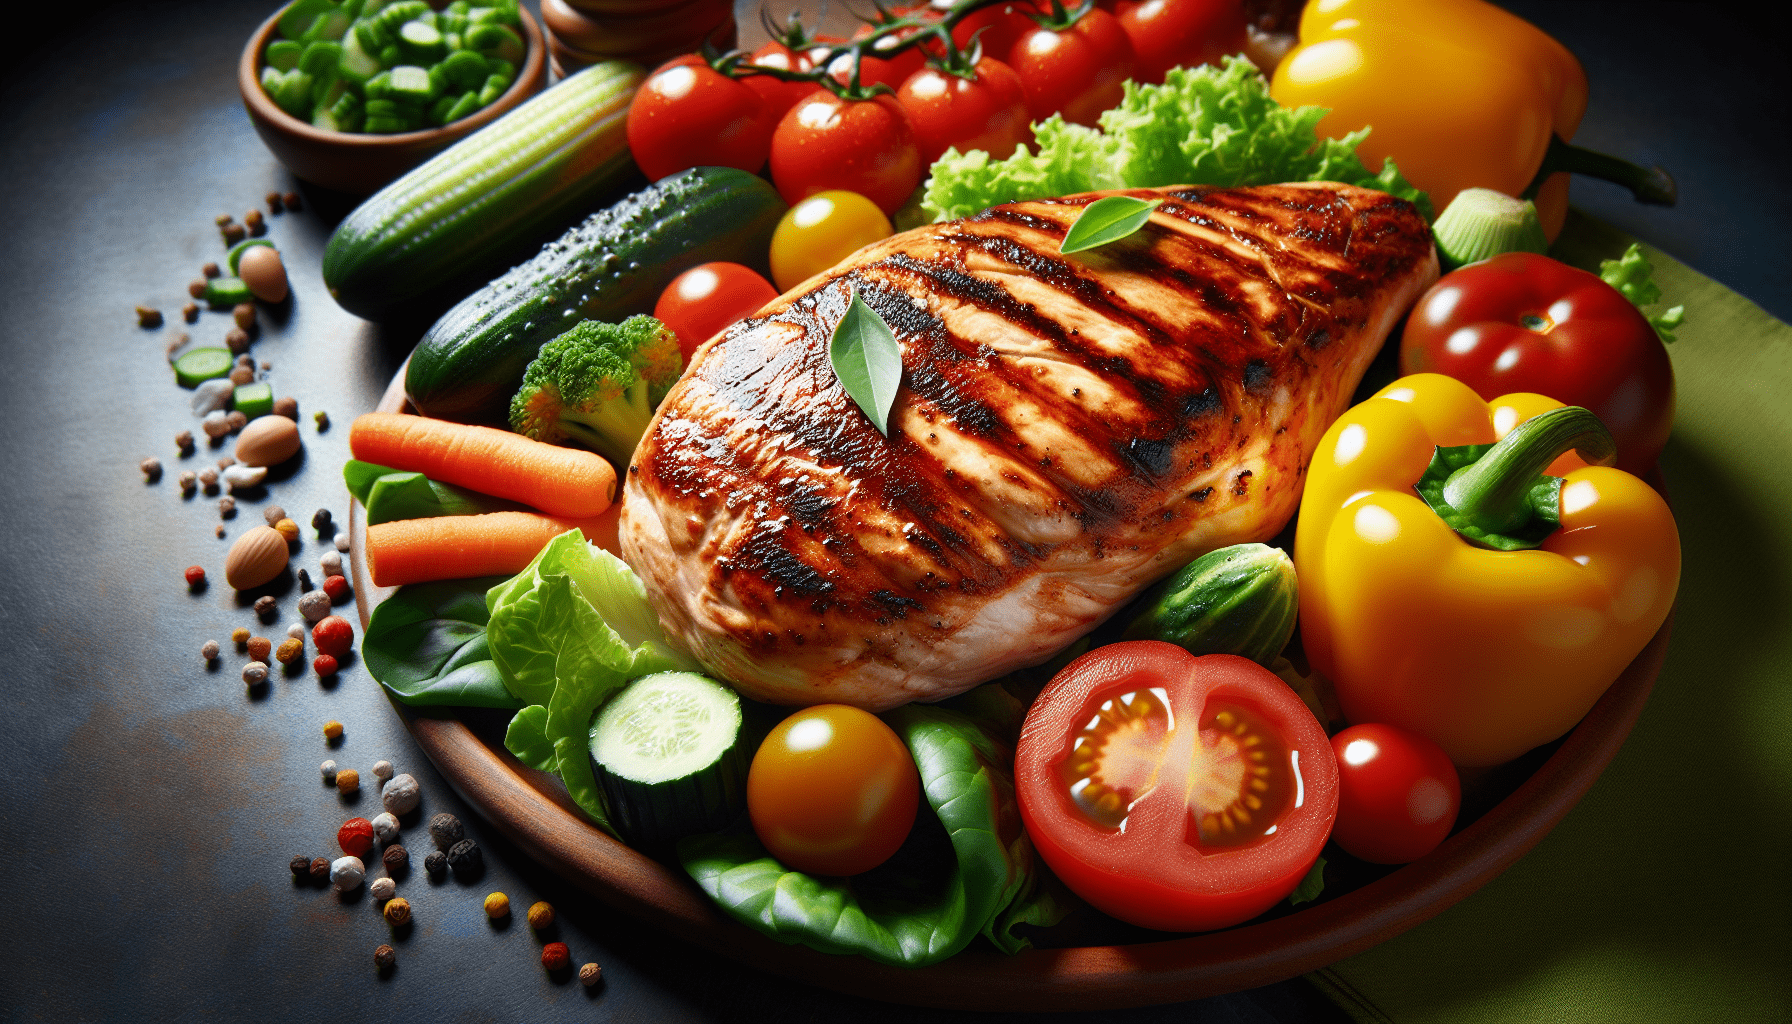 How Much Protein Should I Eat For Fat Loss?